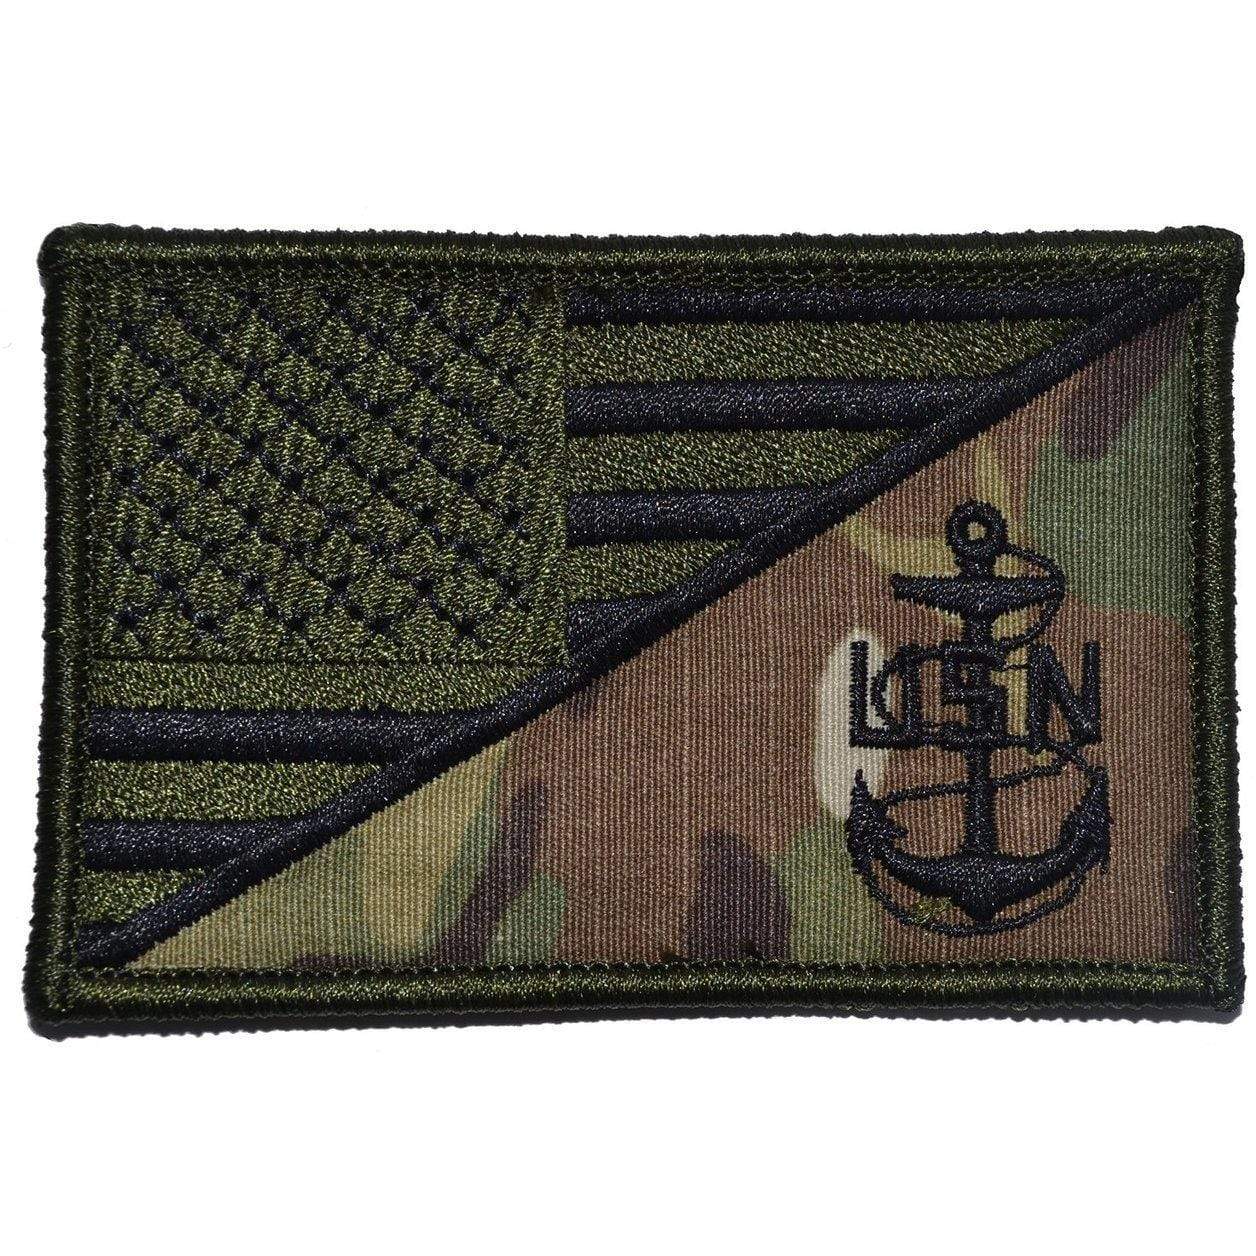 Tactical Gear Junkie Patches MultiCam Navy Chief Petty Officer Anchor USA Flag - 2.25x3.5 Patch